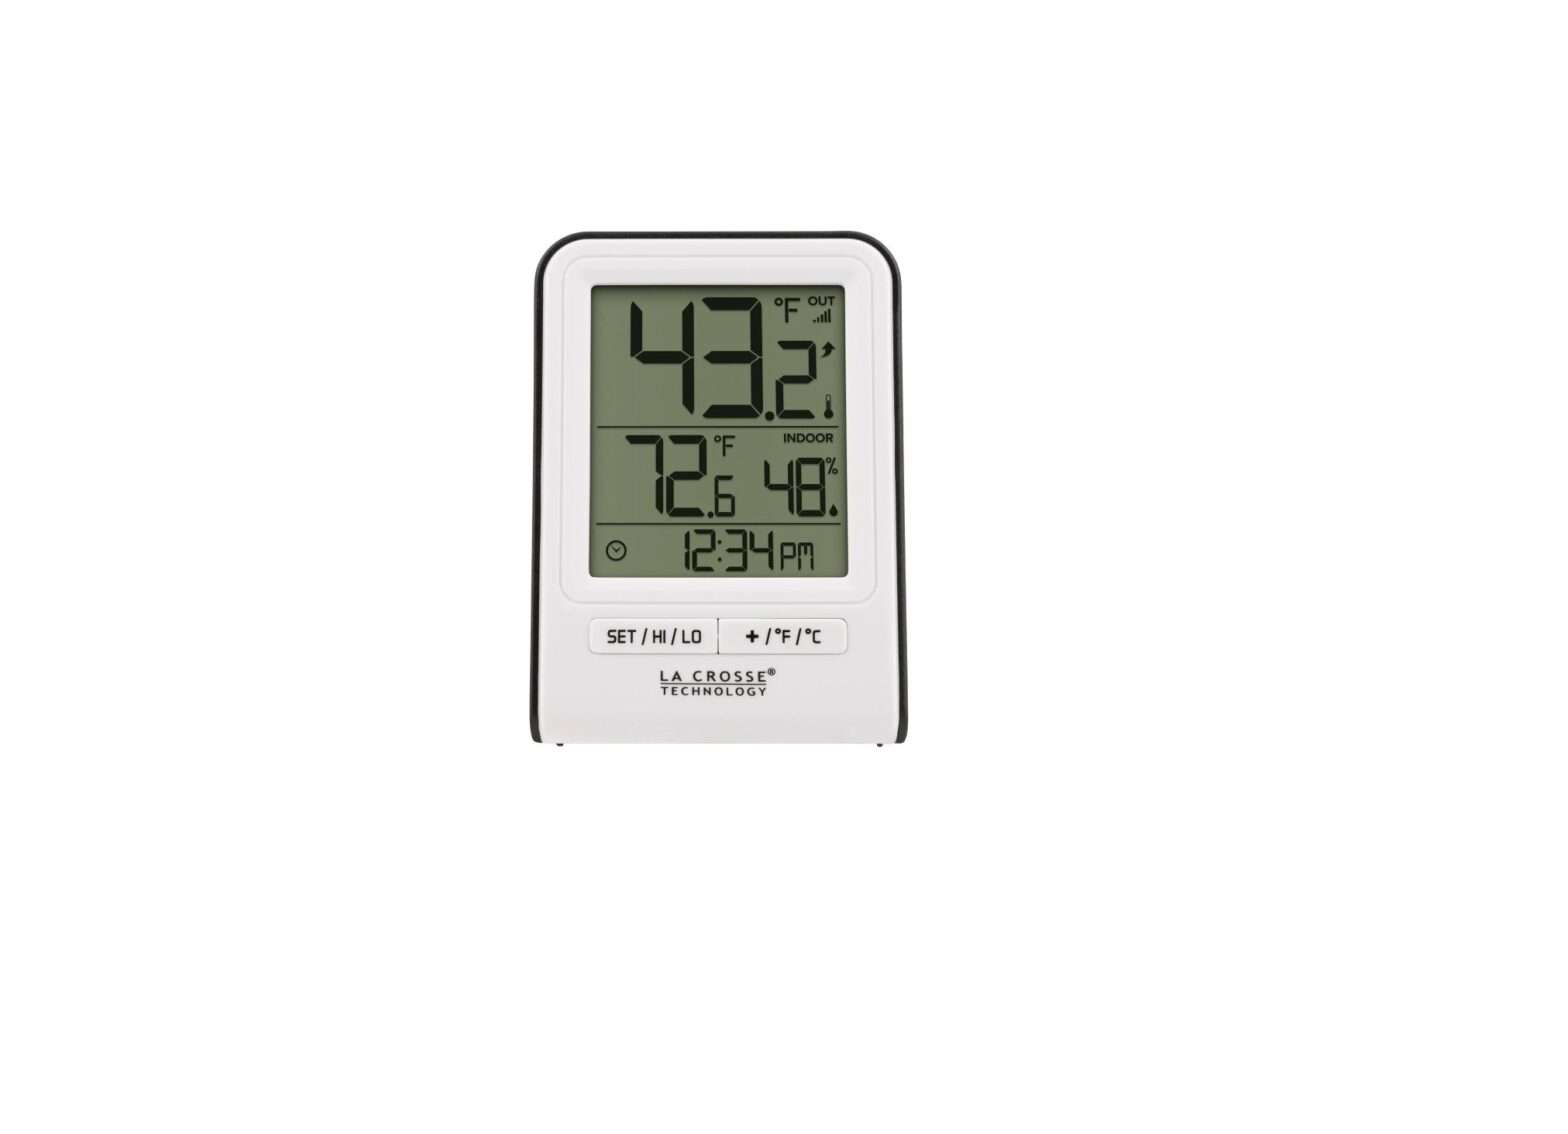 LA Crosse Technology 308-1409WTV4 Wireless Thermometer User Manual - Featured image